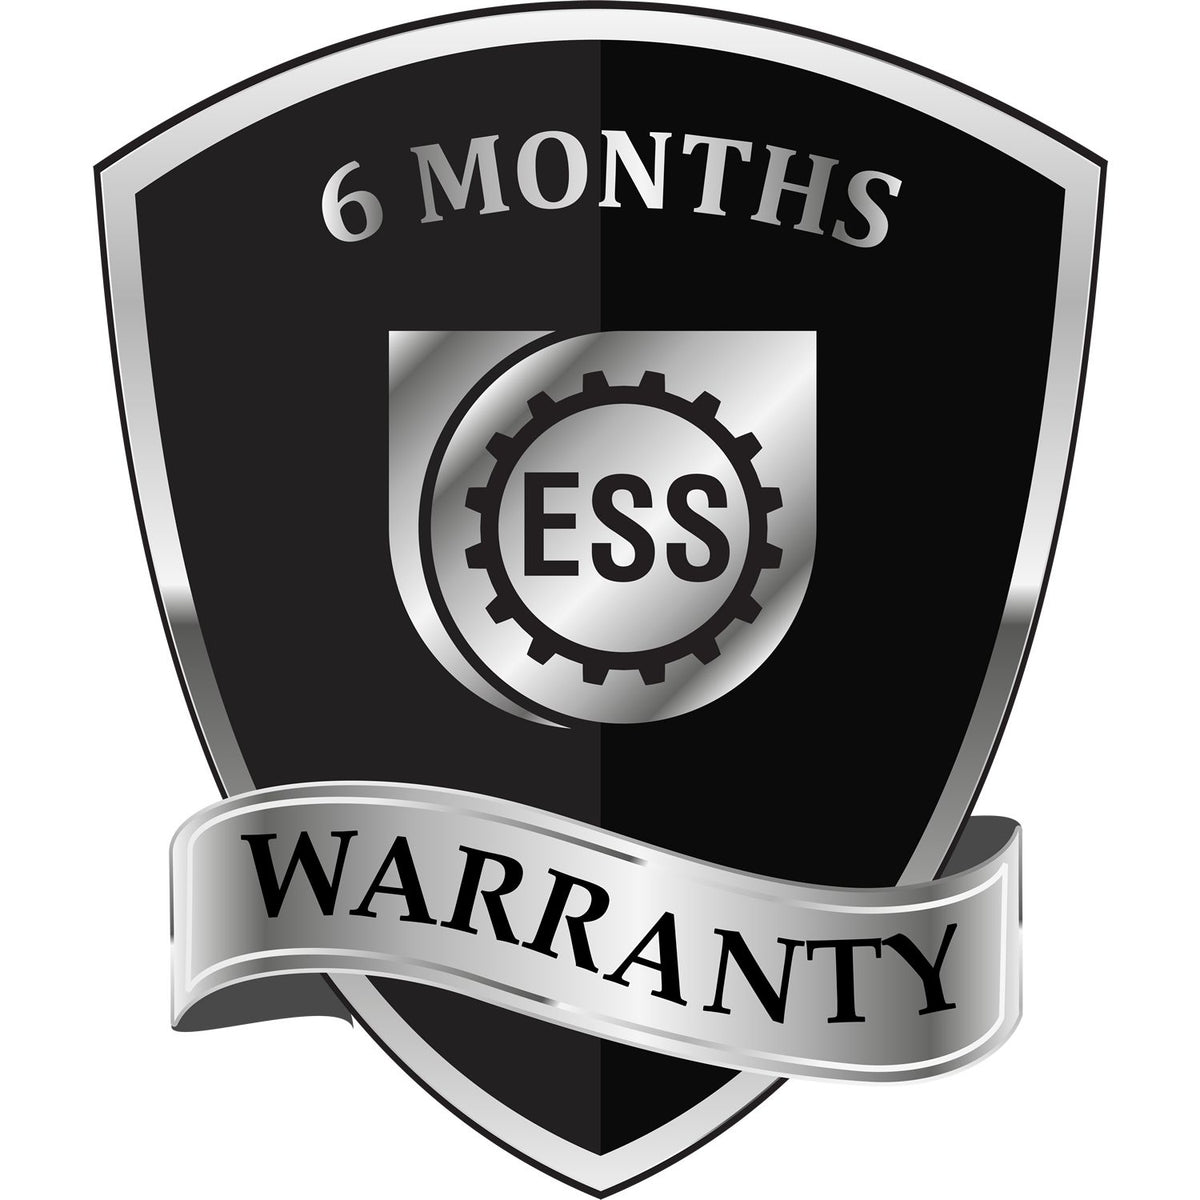 A badge or emblem showing a warranty icon for the Self-Inking Missouri PE Stamp